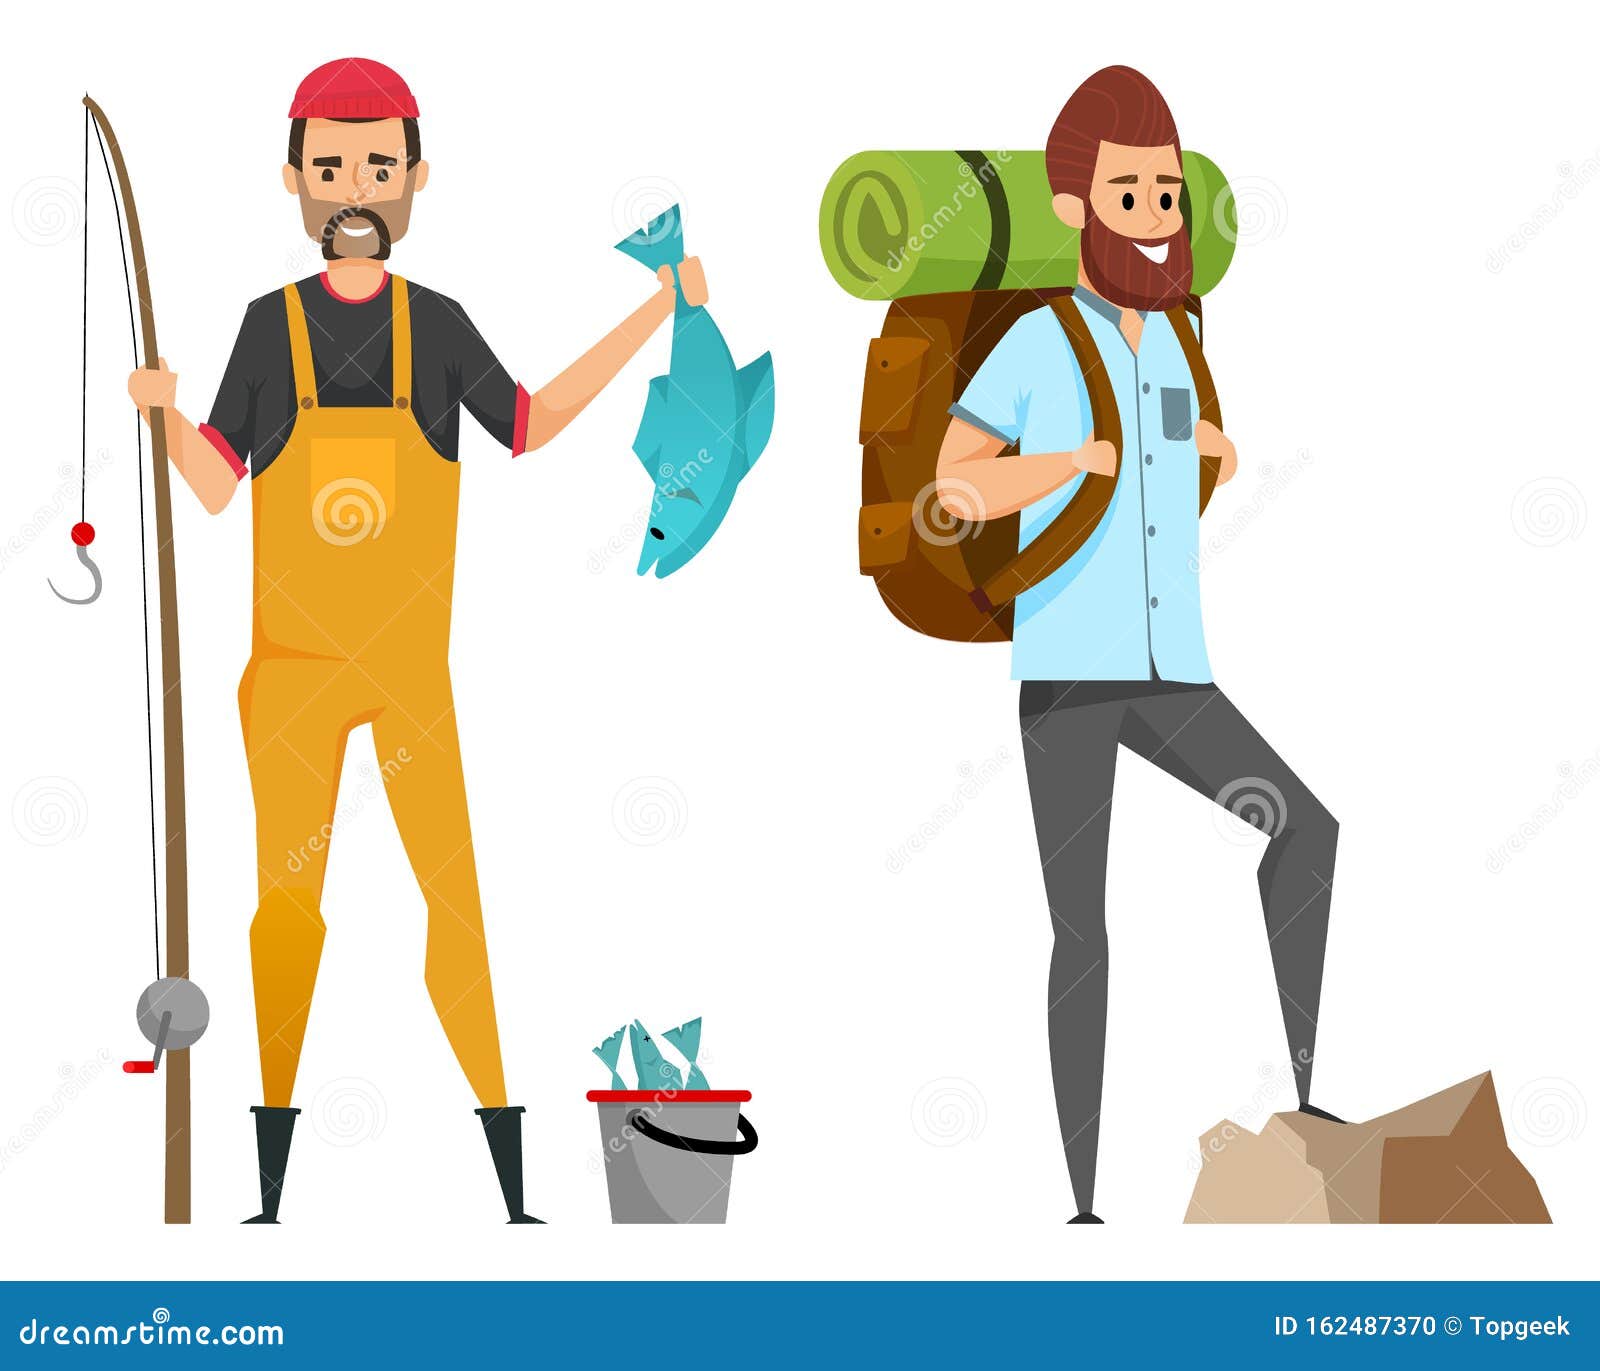 https://thumbs.dreamstime.com/z/hobby-fishing-hiking-male-leisure-vector-smiling-men-casual-clothes-holding-fish-rod-pike-backpack-mat-portrait-full-162487370.jpg